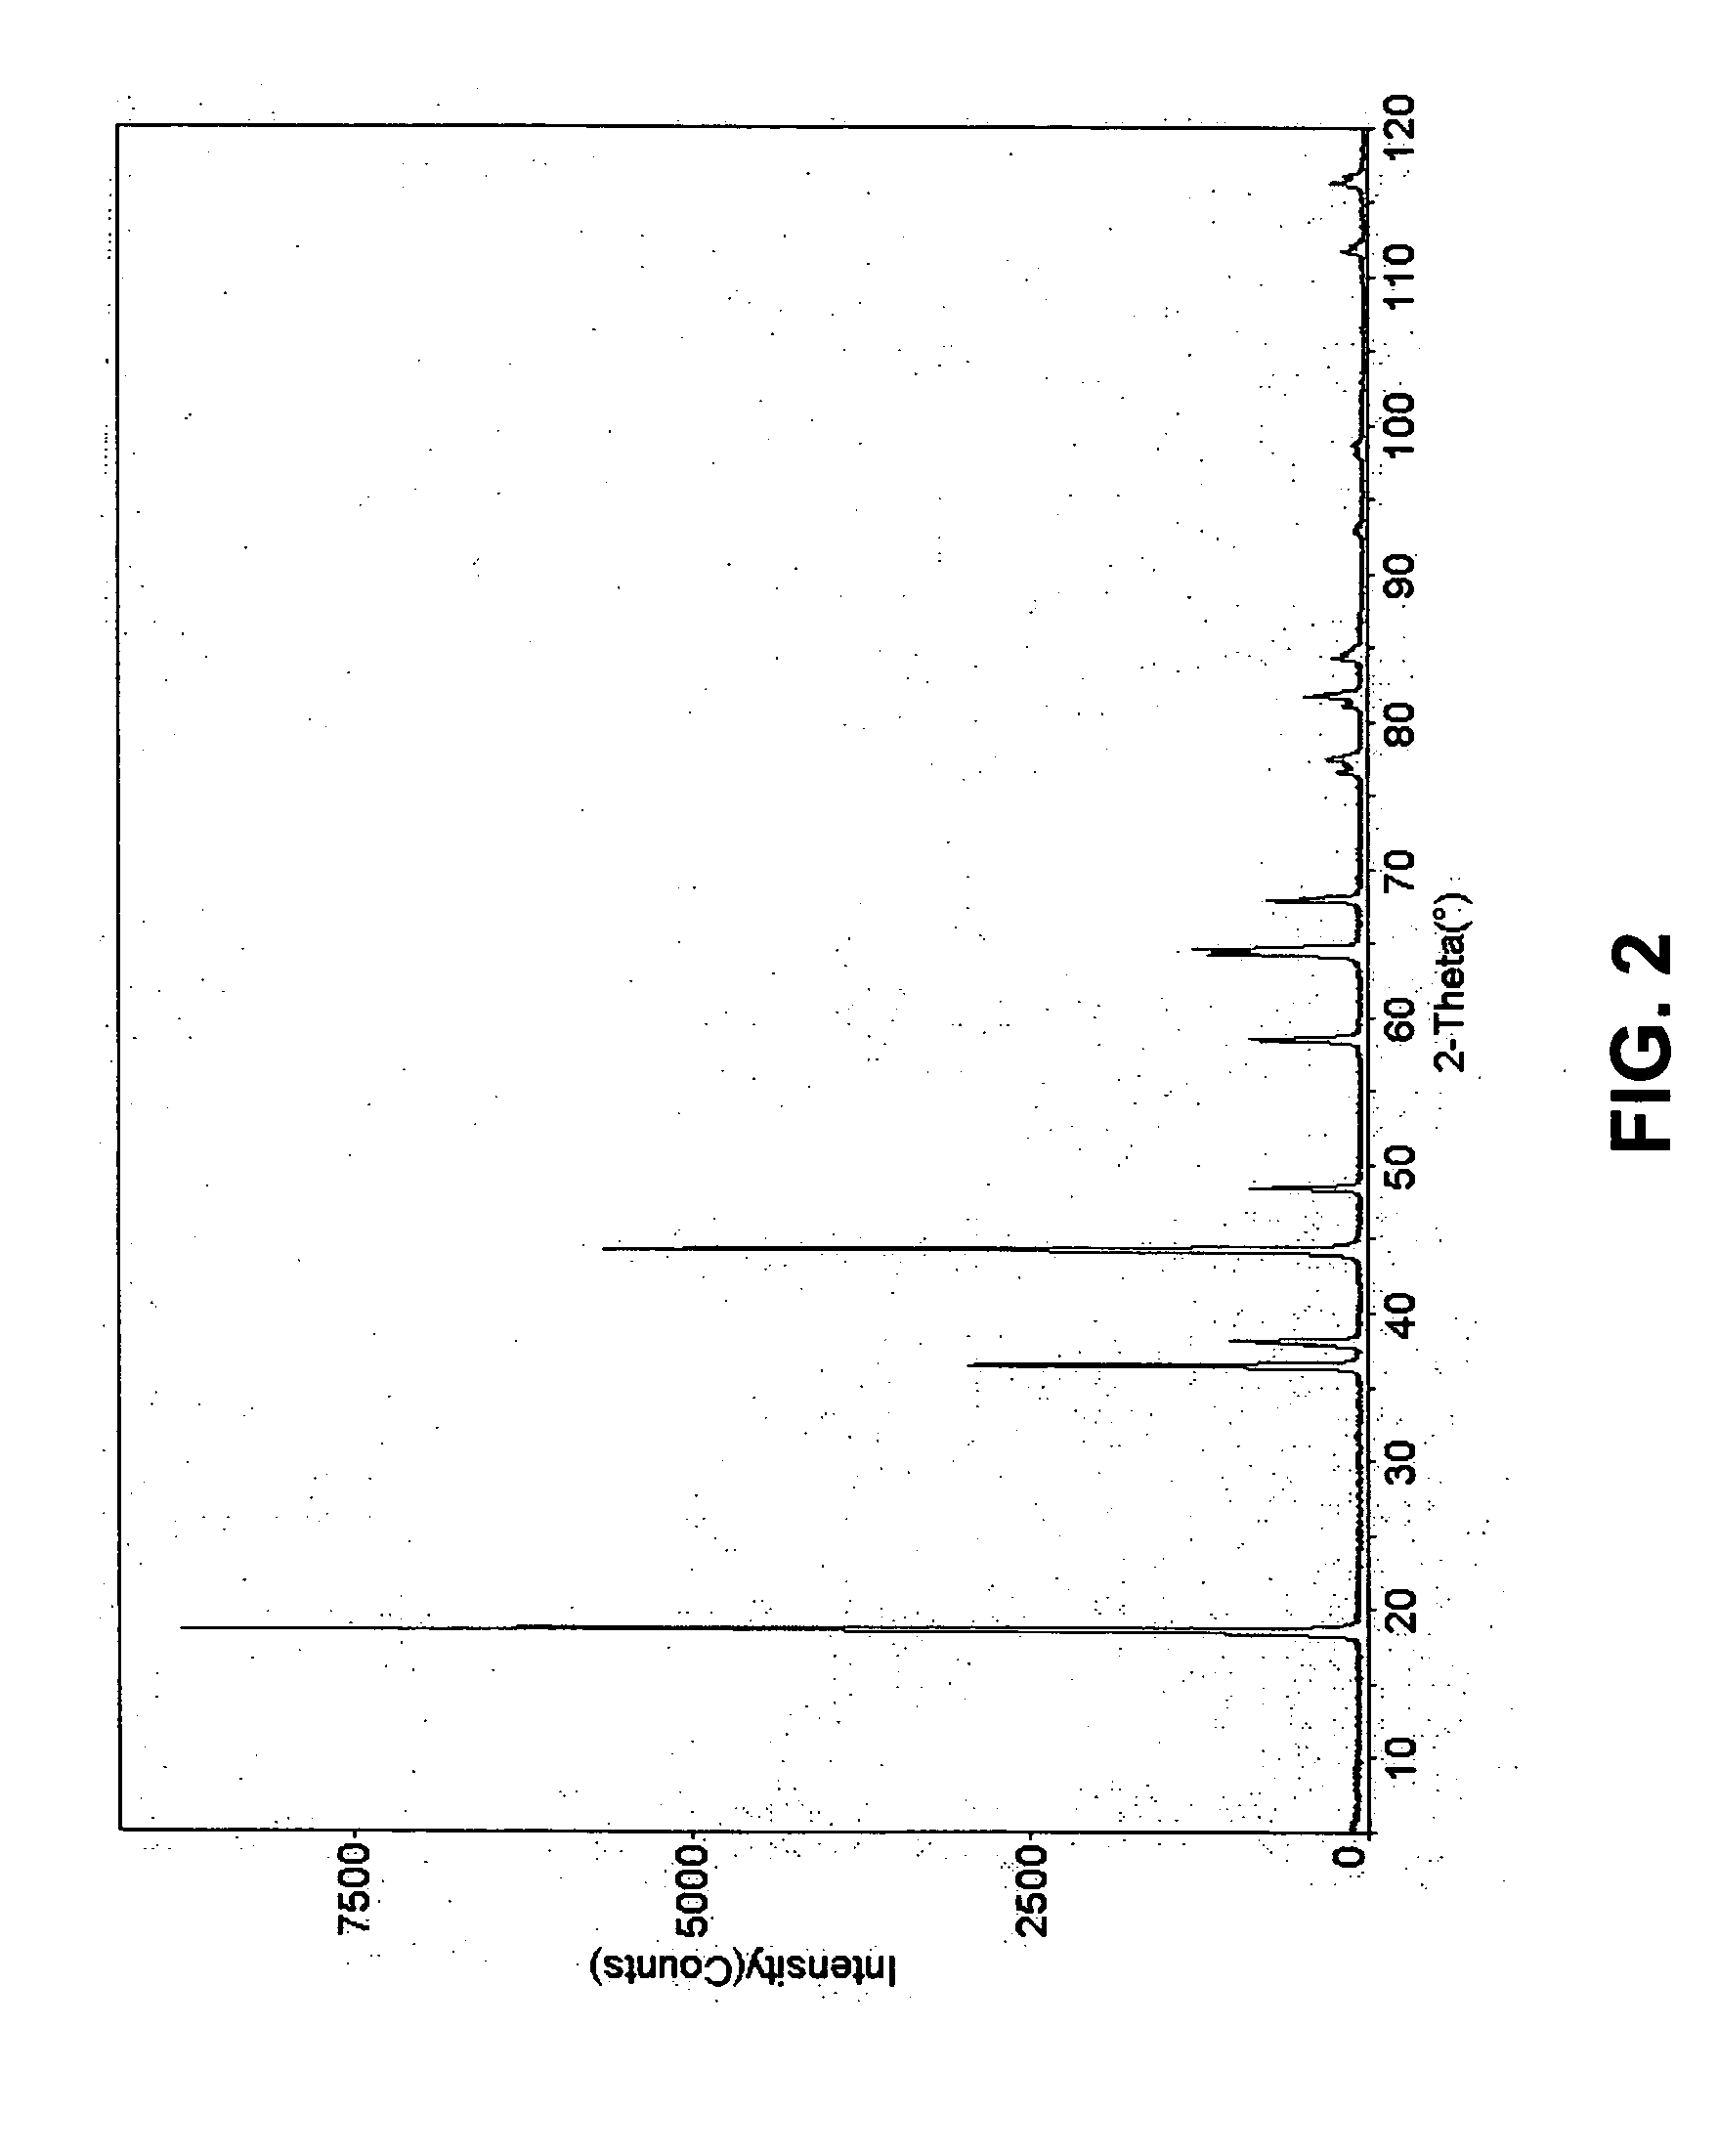 Lithium metal oxide materials and methods of synthesis and use